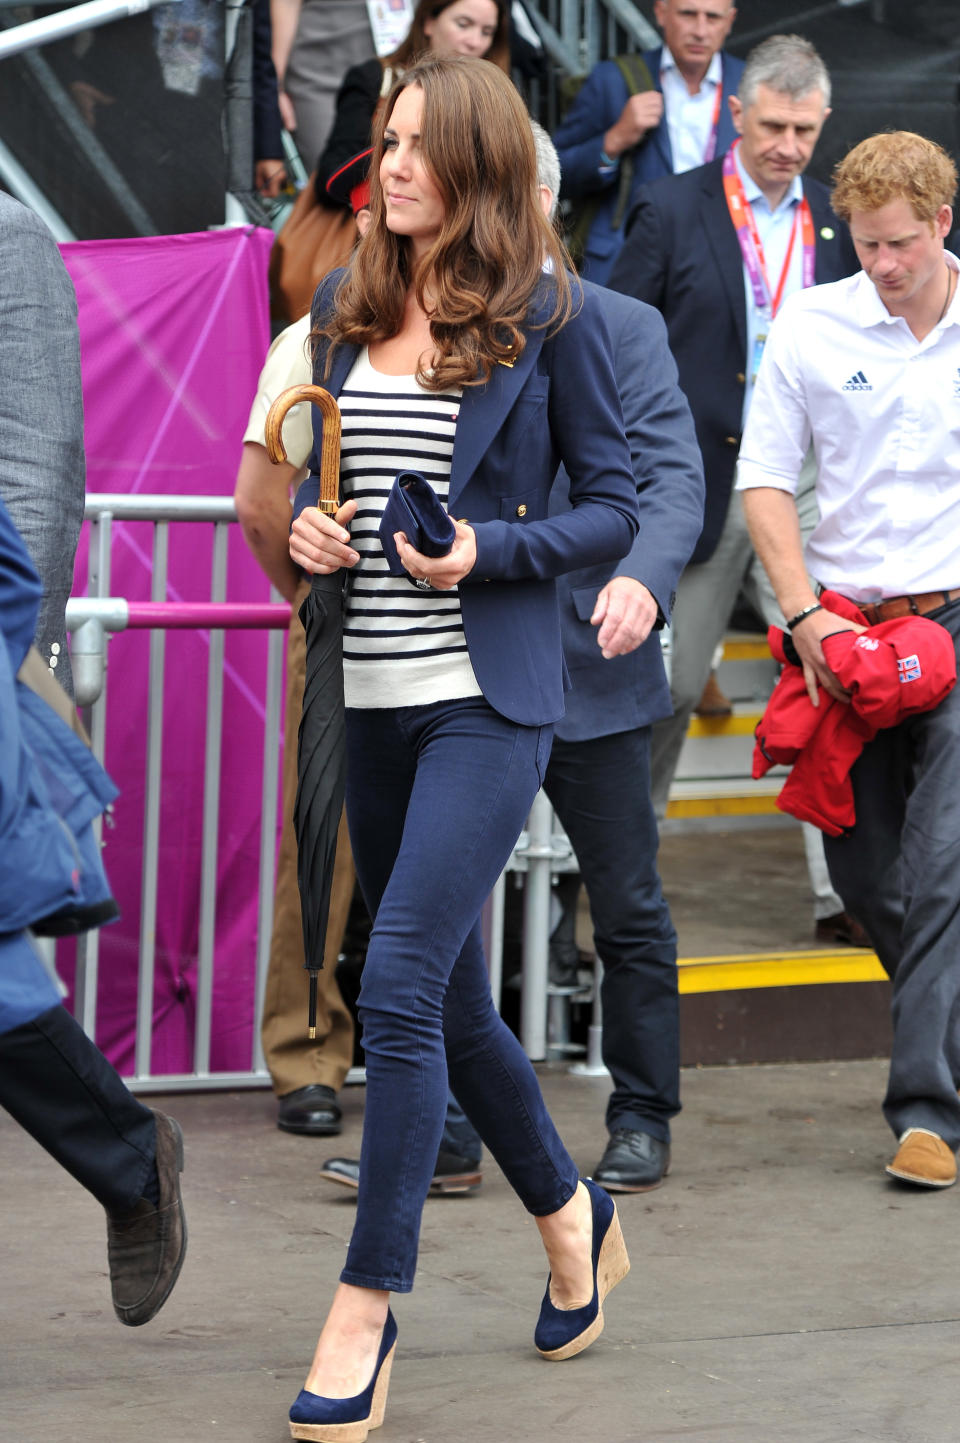 Kate’s navy blazer, pants, wedges, and clutch could easily be dull but her striped shirt pulls it together. We also can't help but notice that the umbrella is one her best unintentional accessories. Here the Duchess walks to her seat prior to the Show Jumping Eventing Equestrian on Day 4 of the London Games.